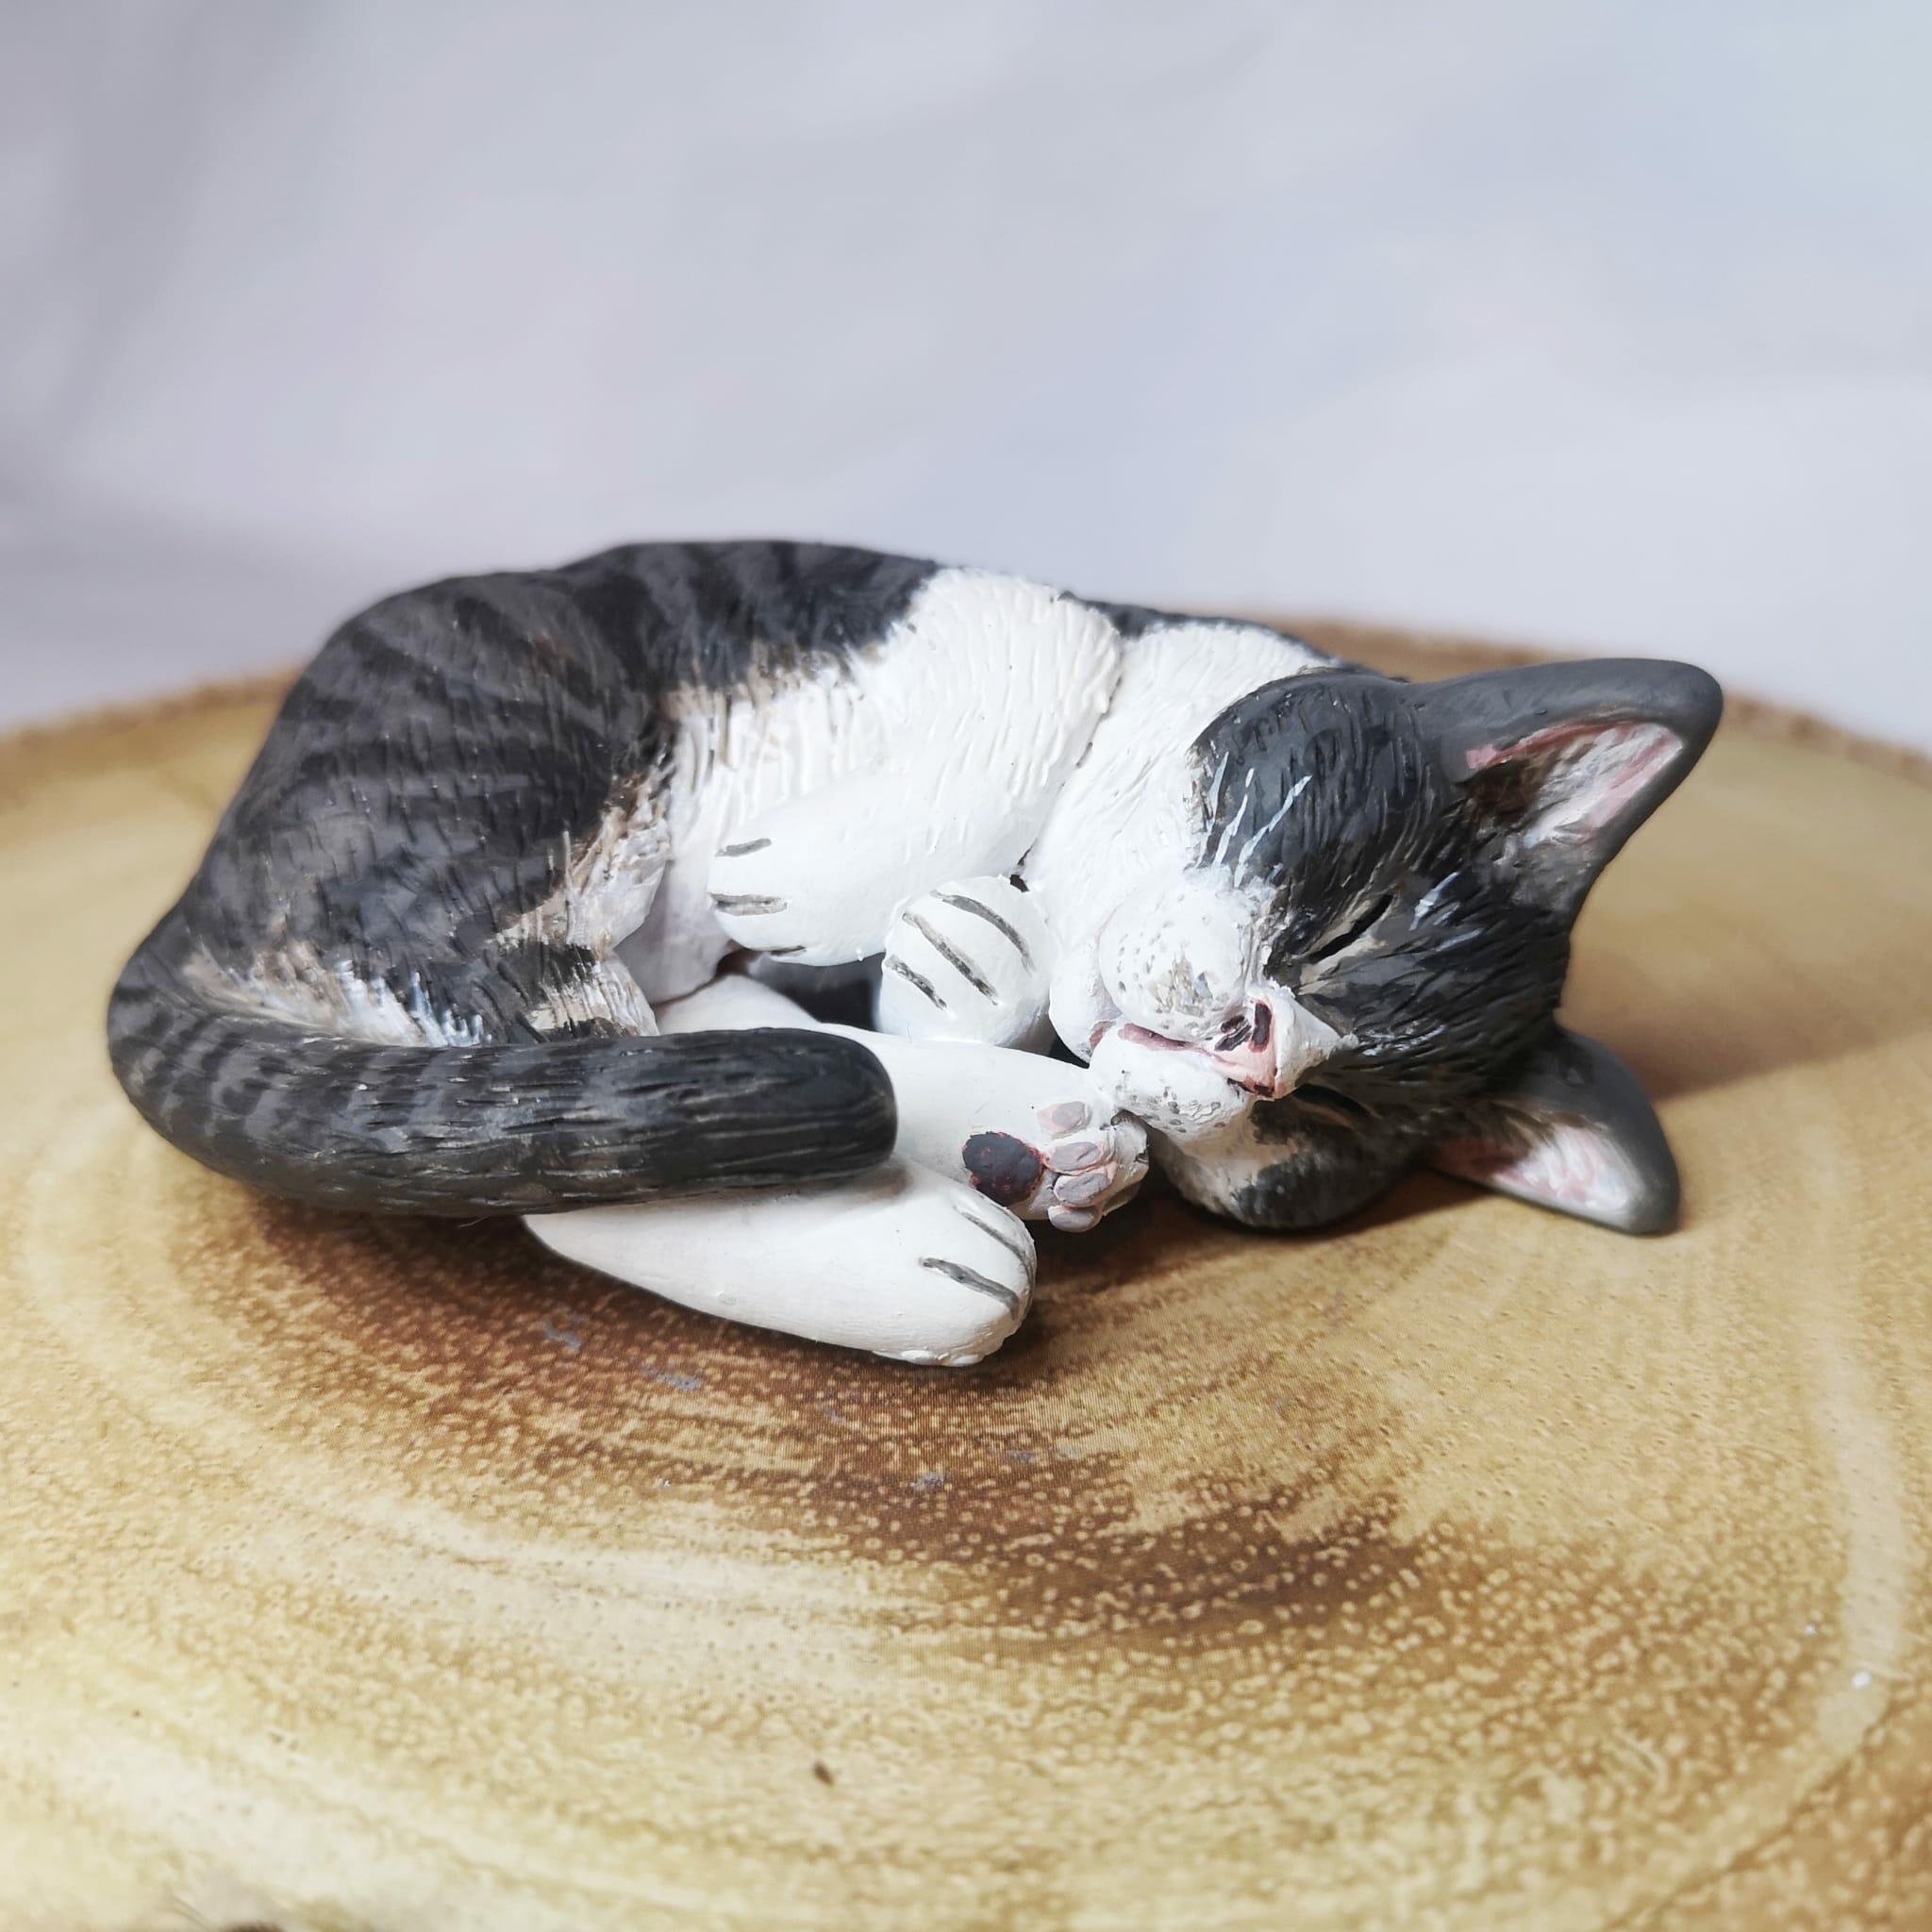 Handmade and handpainted clay model of a cat asleep, capturing the tranquility and serenity of a feline friend in a lifelike and personalized creation.